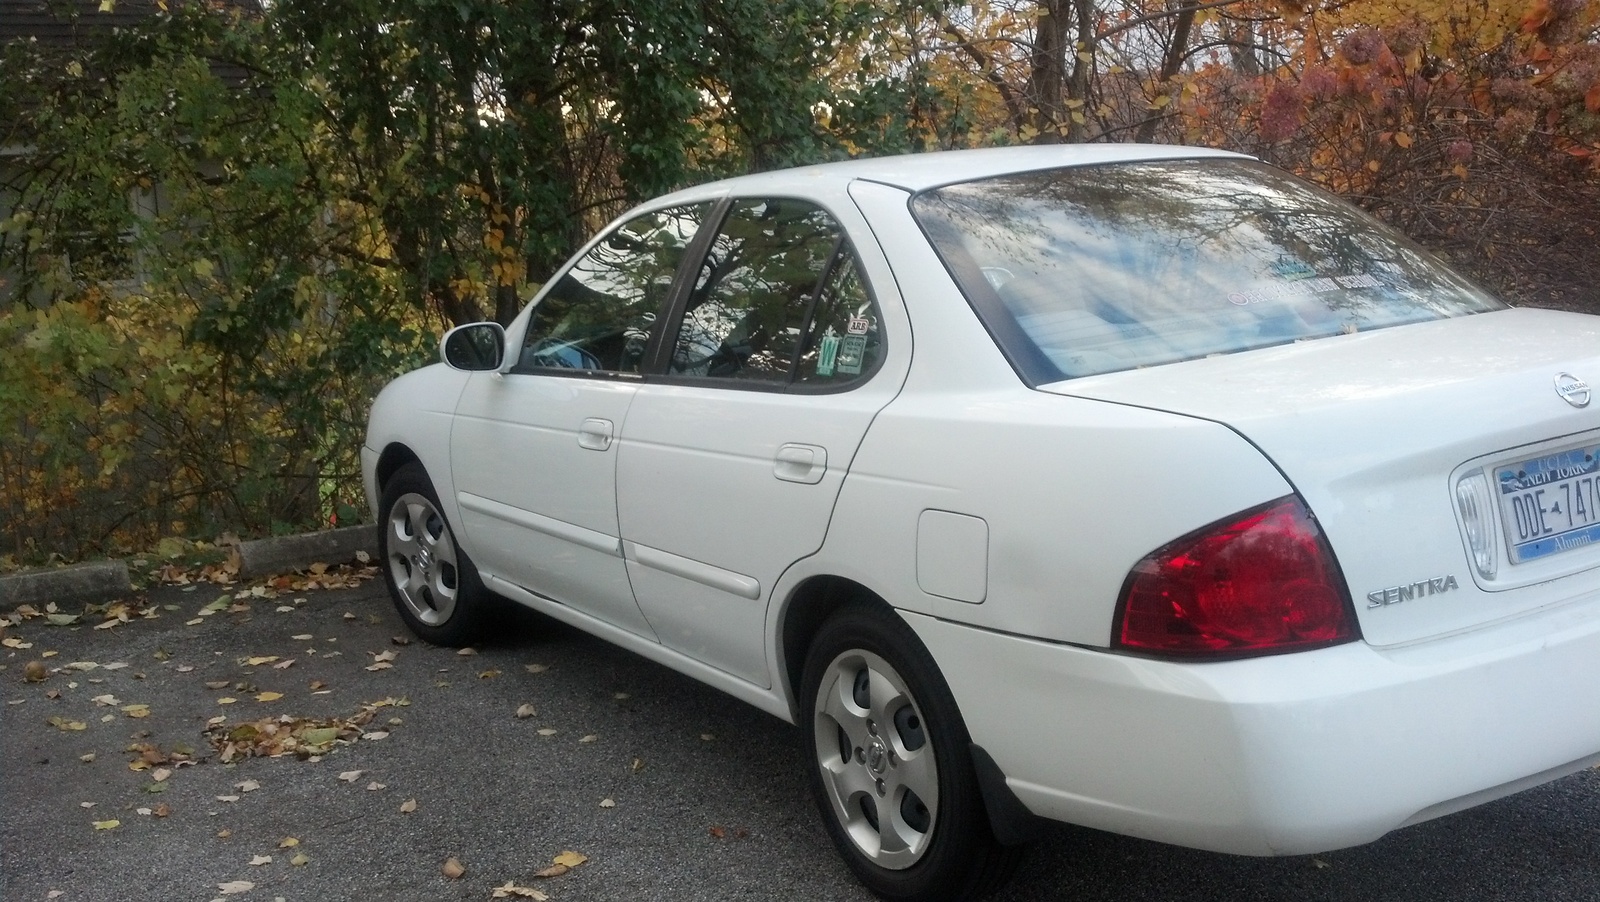 2004 Nissan sentra 2.5 s review #1